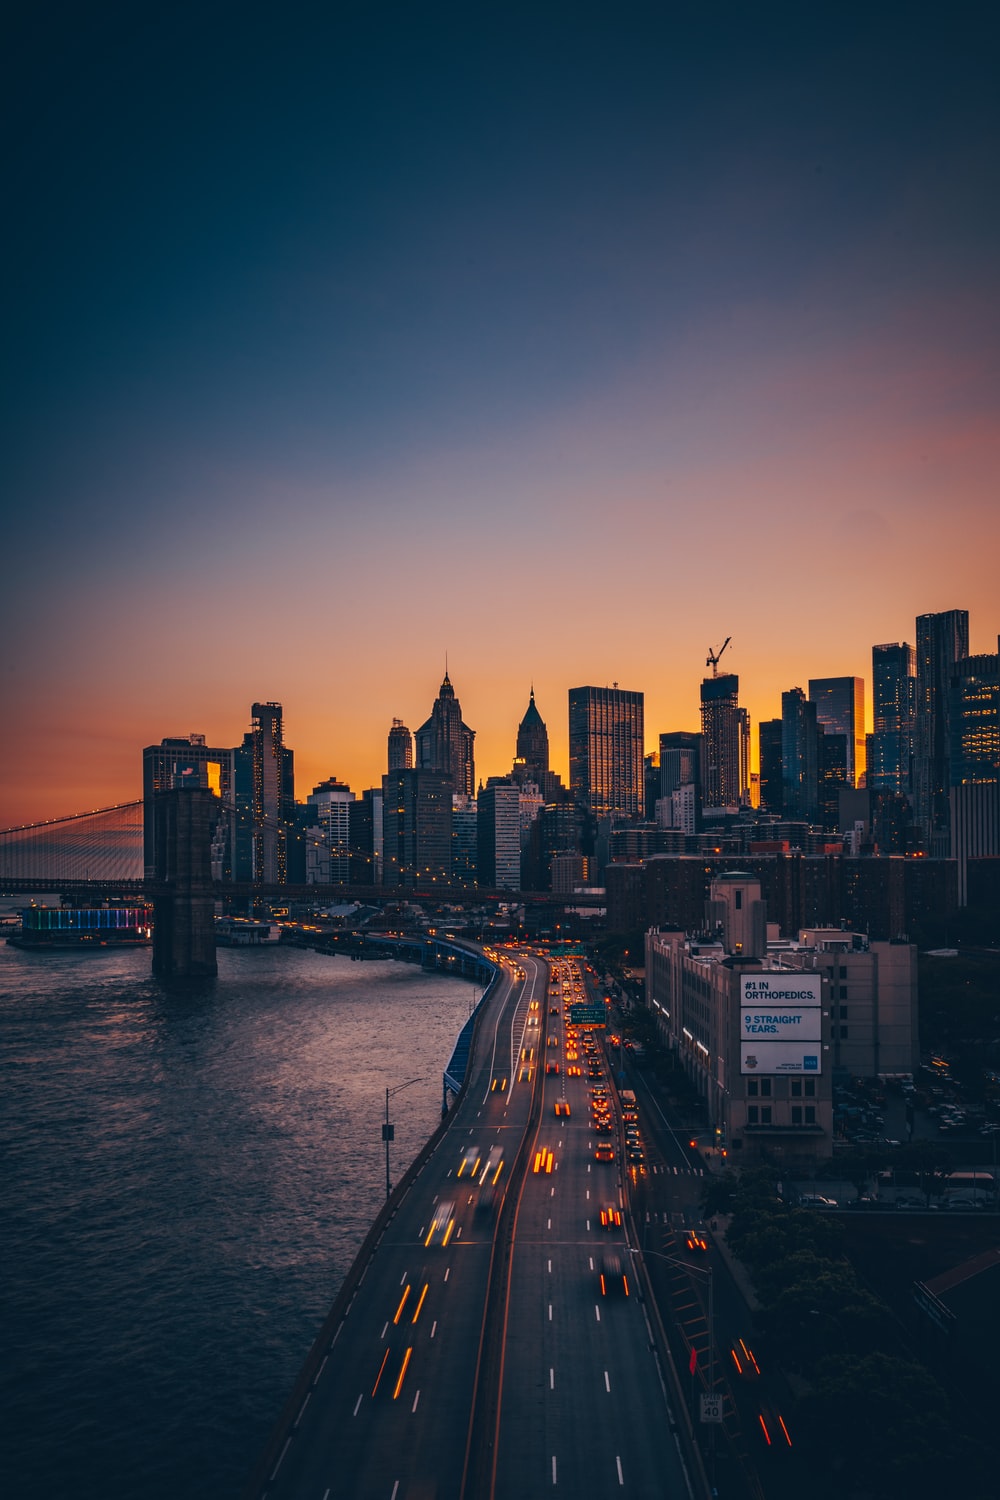 New York Sunset Picture. Download Free Image